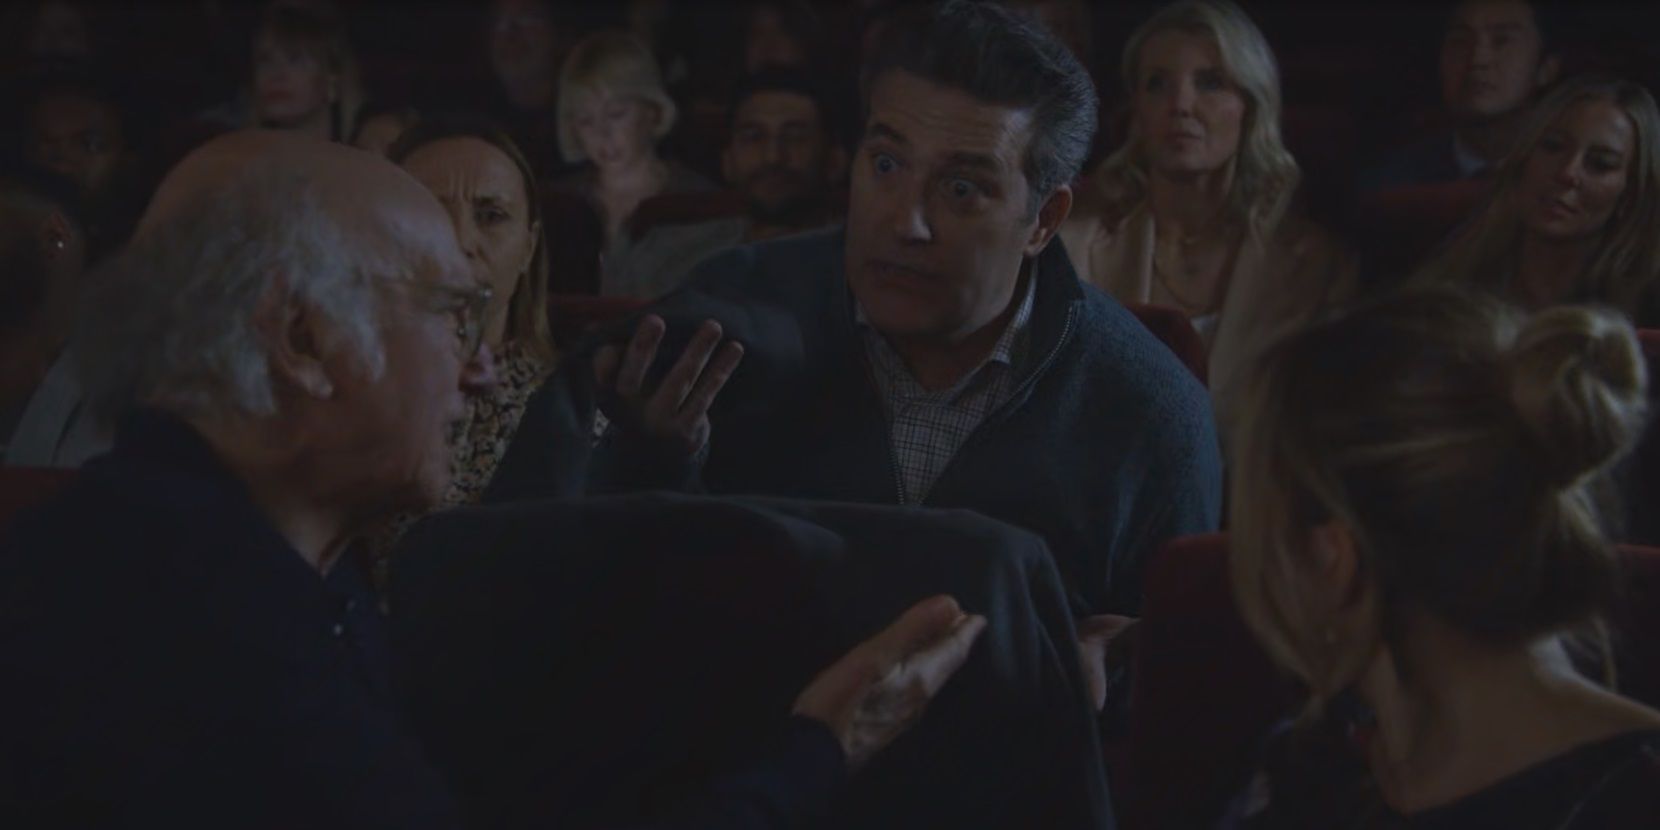 Larry has an argument in a theater in Curb Your Enthusiasm